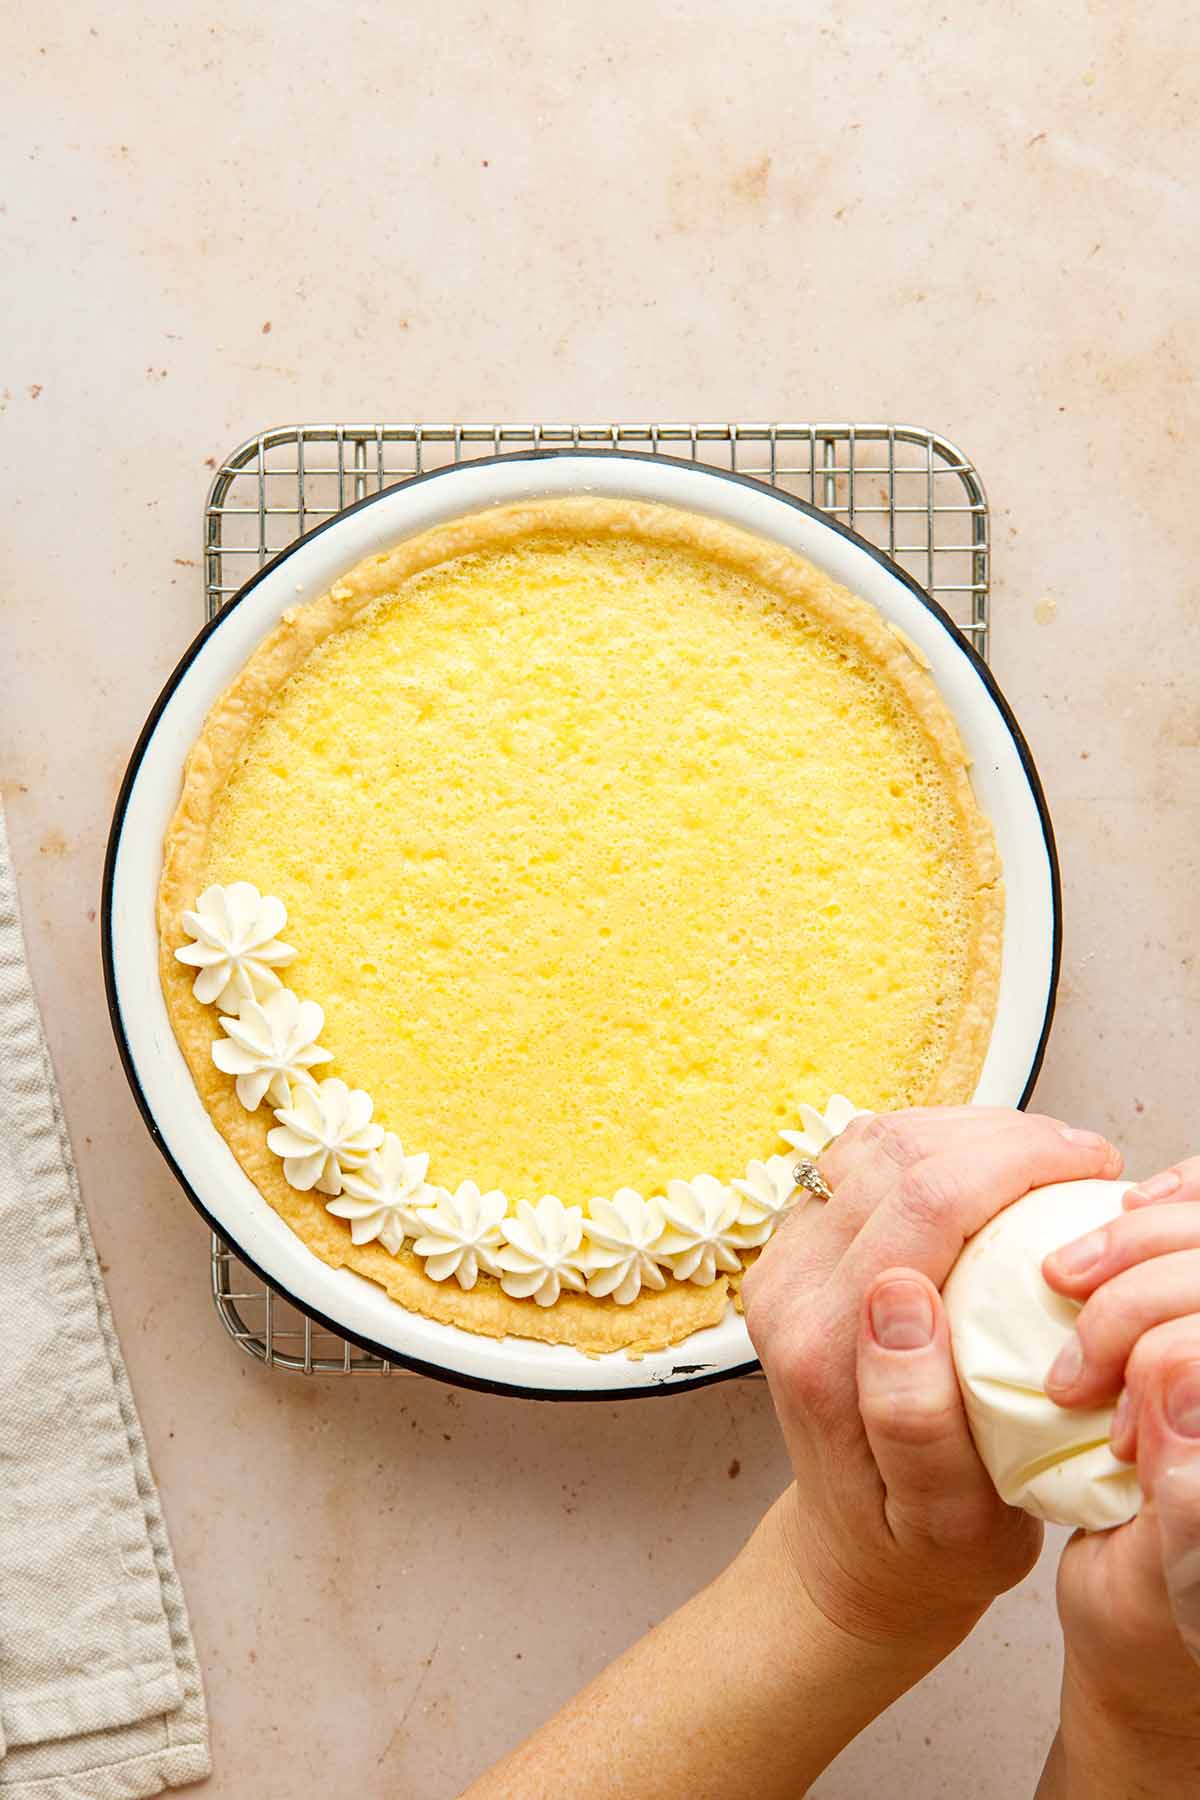 A hand piping whipped cream on top of a lemon chess pie.